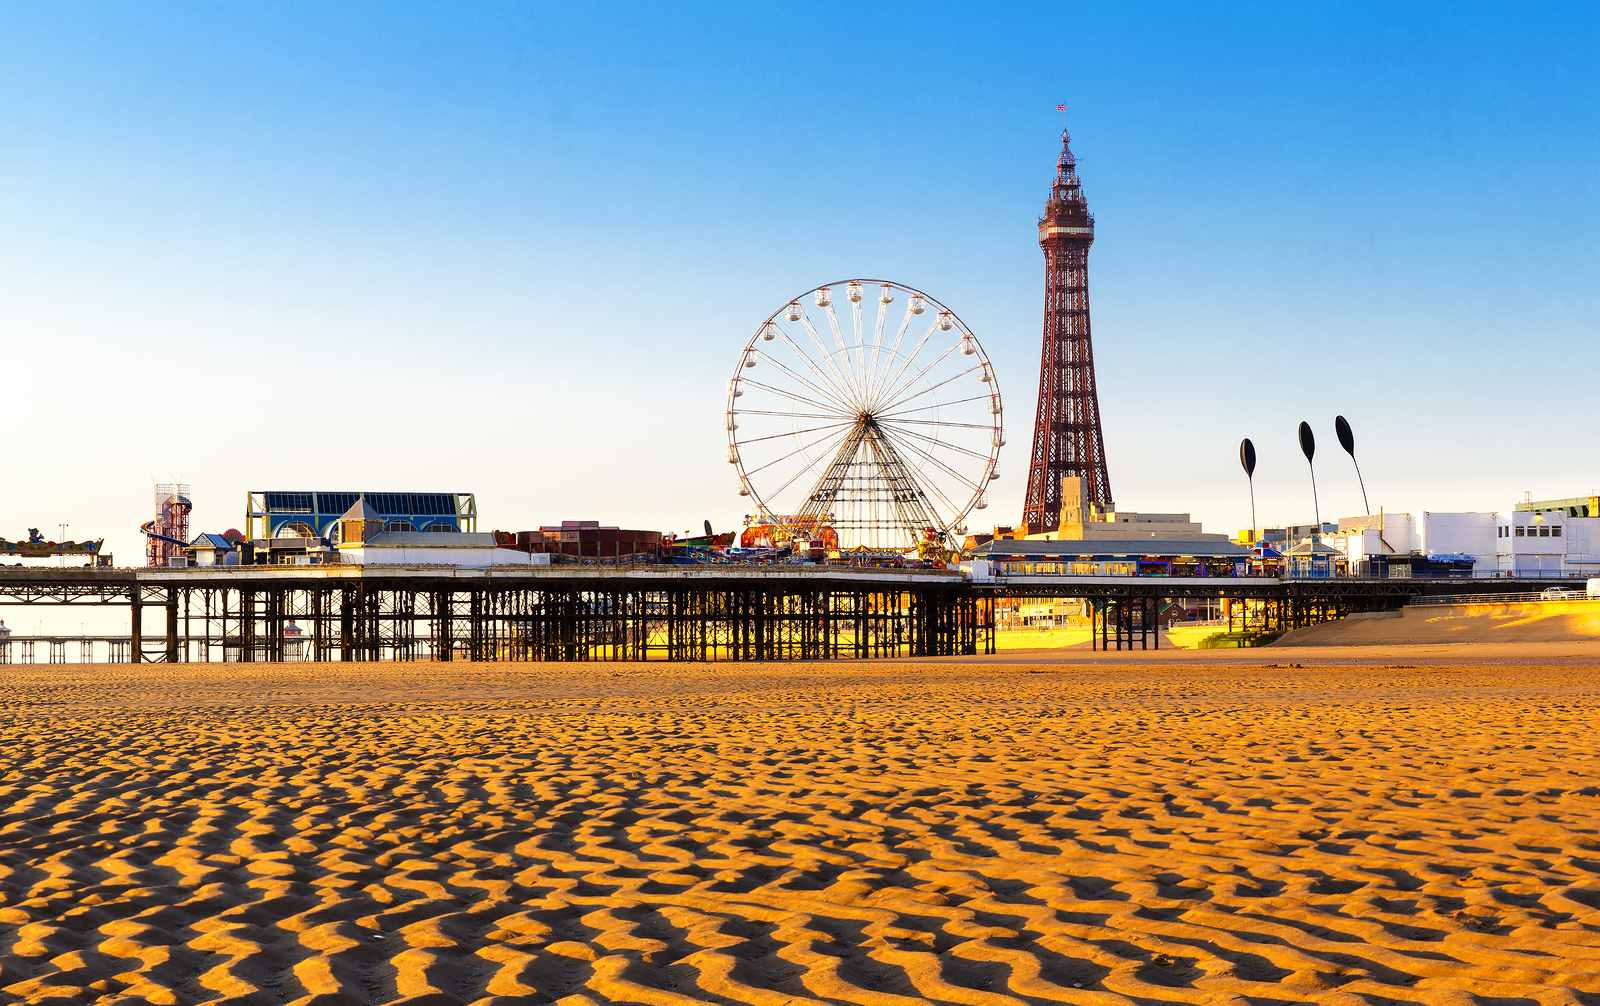 5 Fascinating Facts About Blackpool